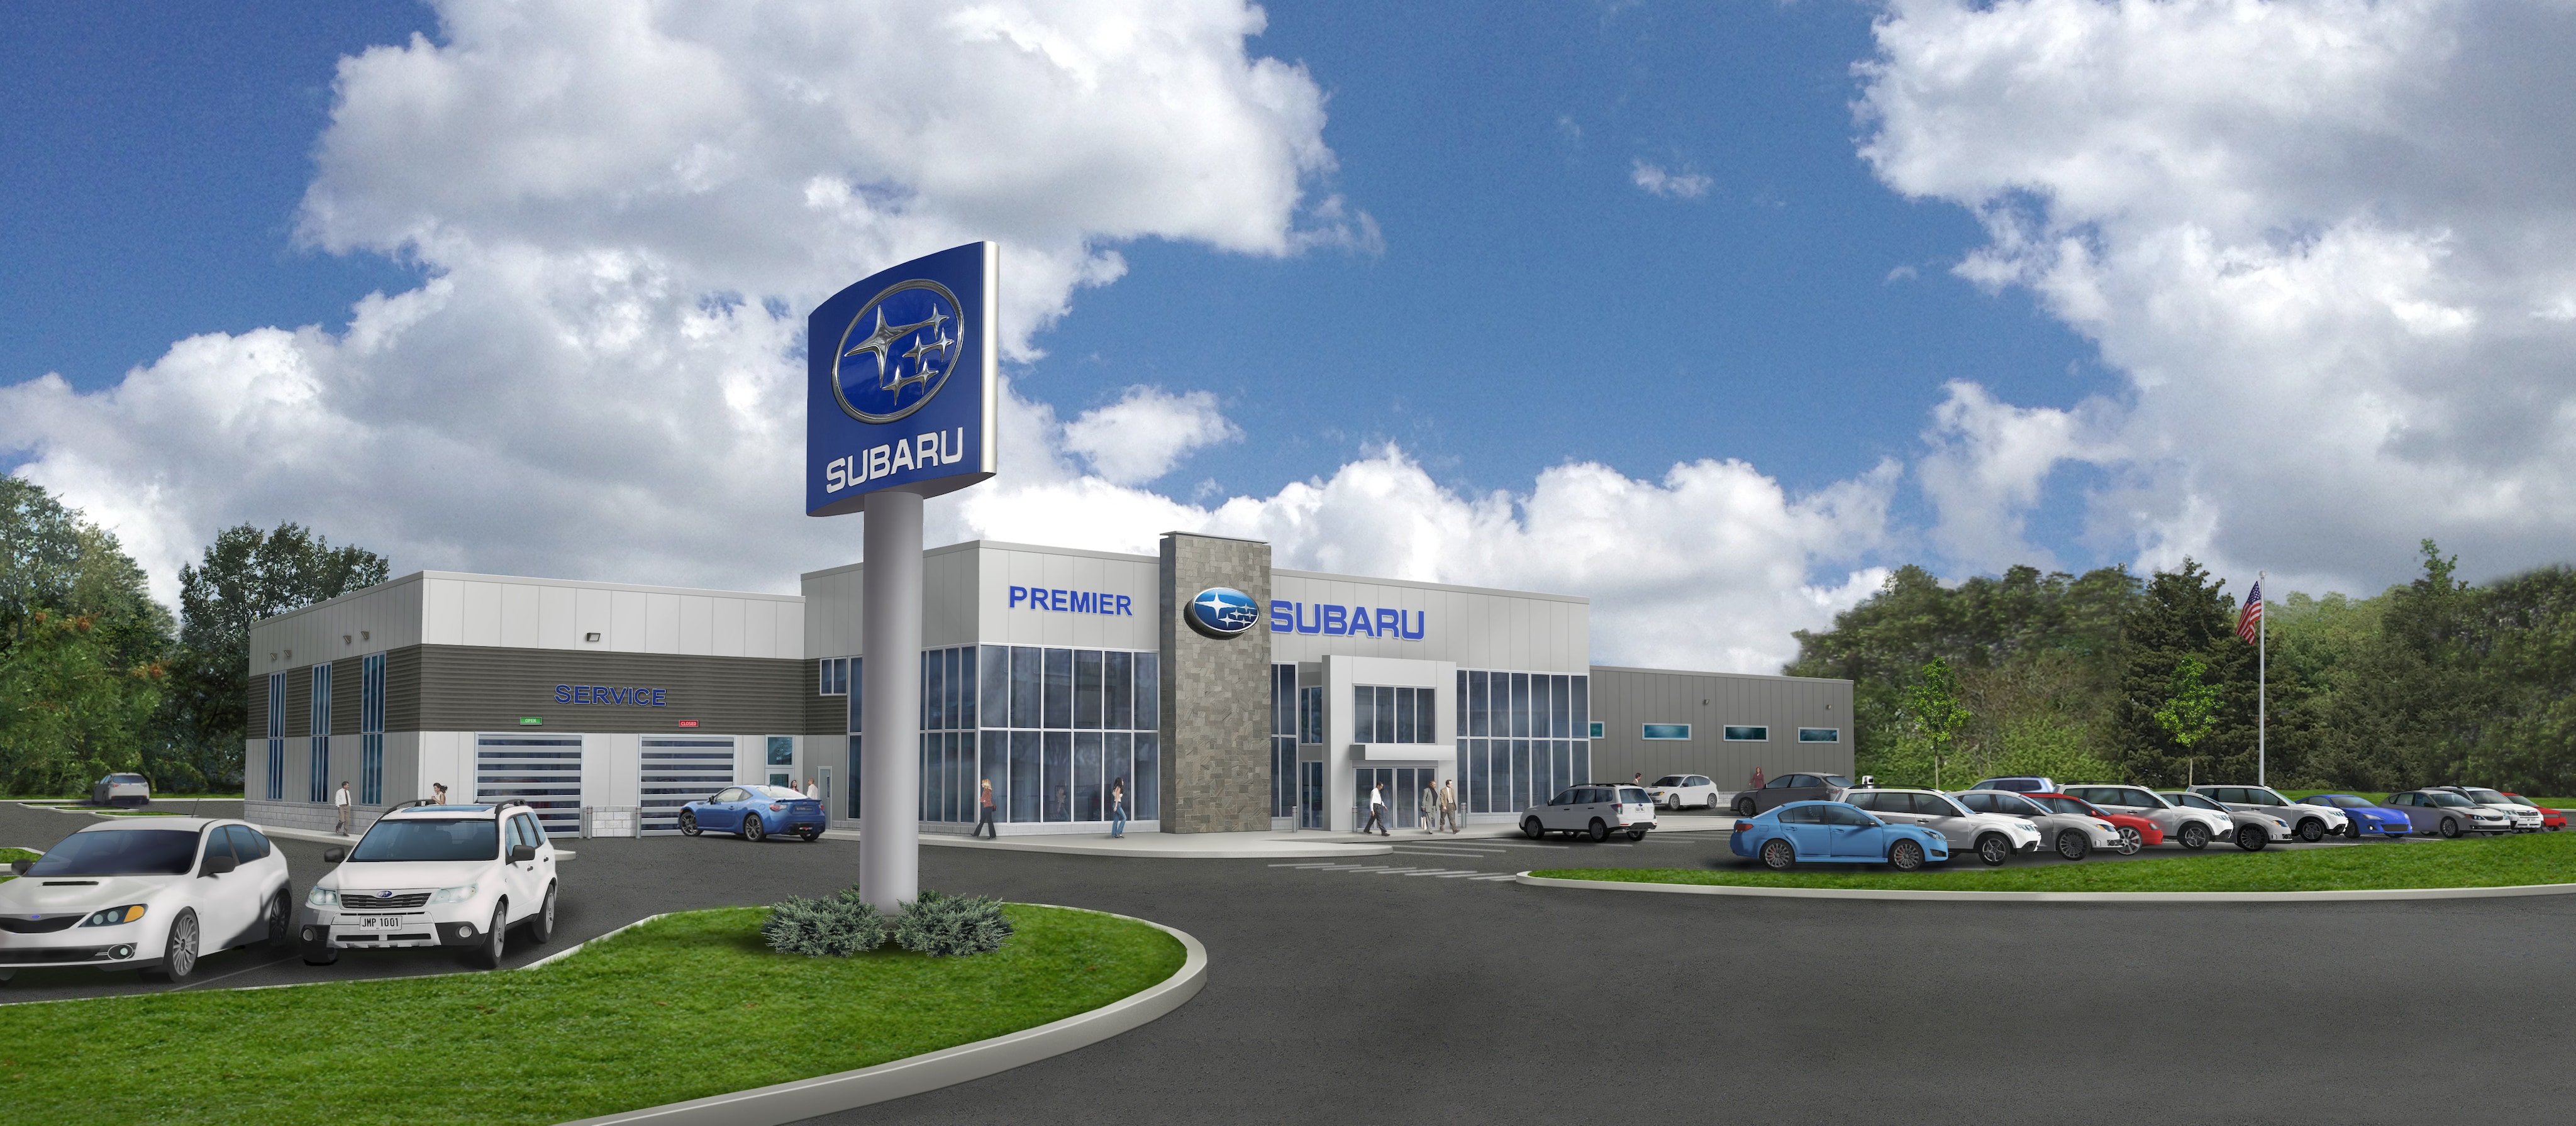 Coming soon our new Premier Subaru Facility in Middlebury CT